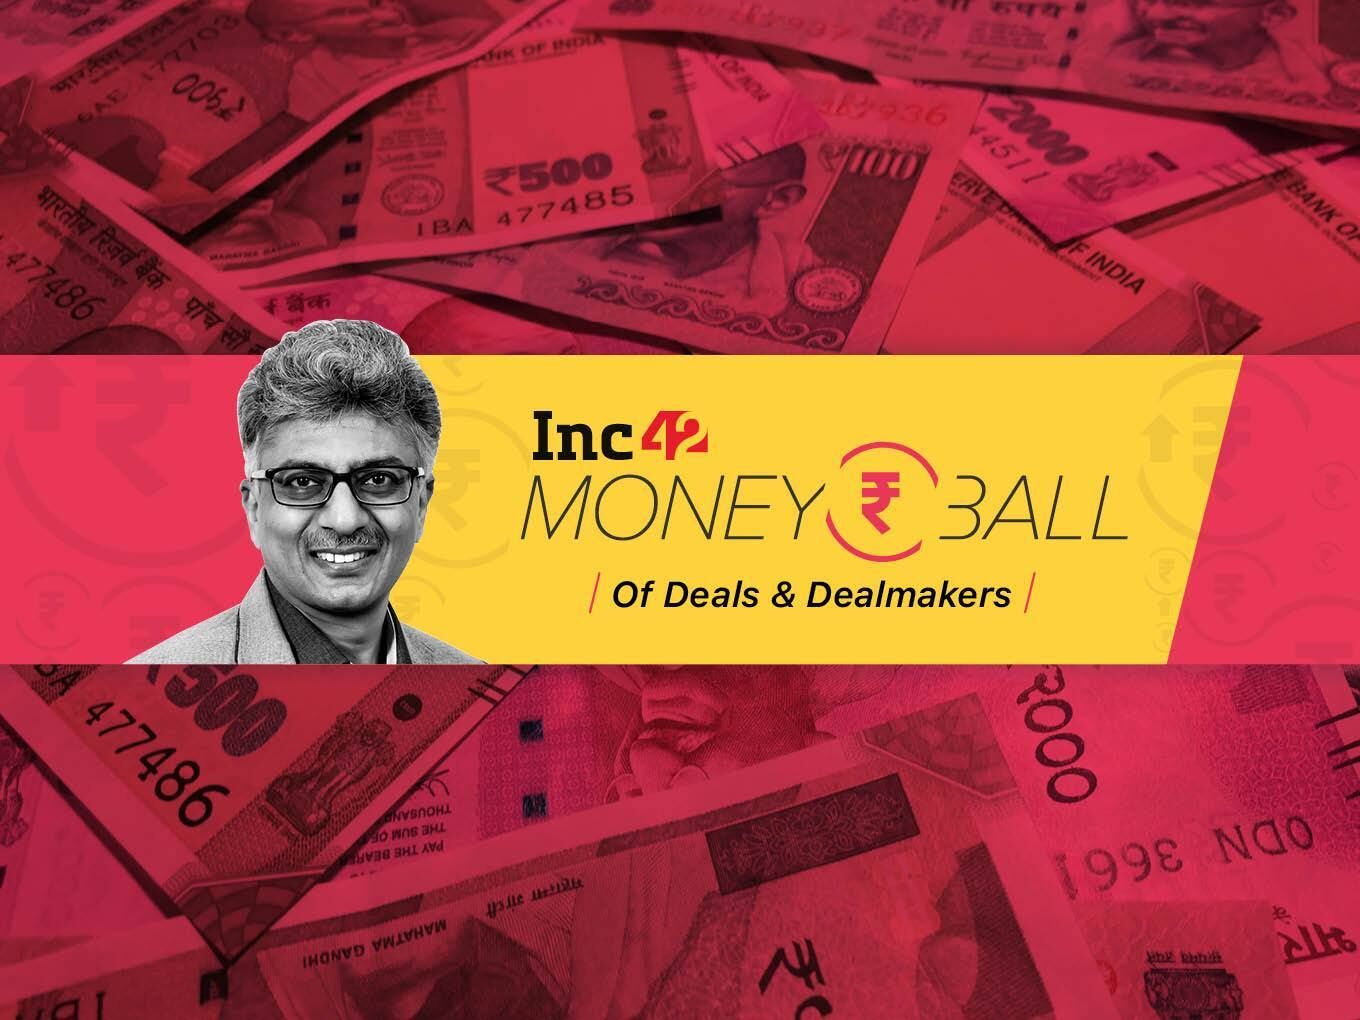 Moneyball: Sunil Goyal Of YourNest Venture Capital Talks About Getting The ‘Edge’ On IoT